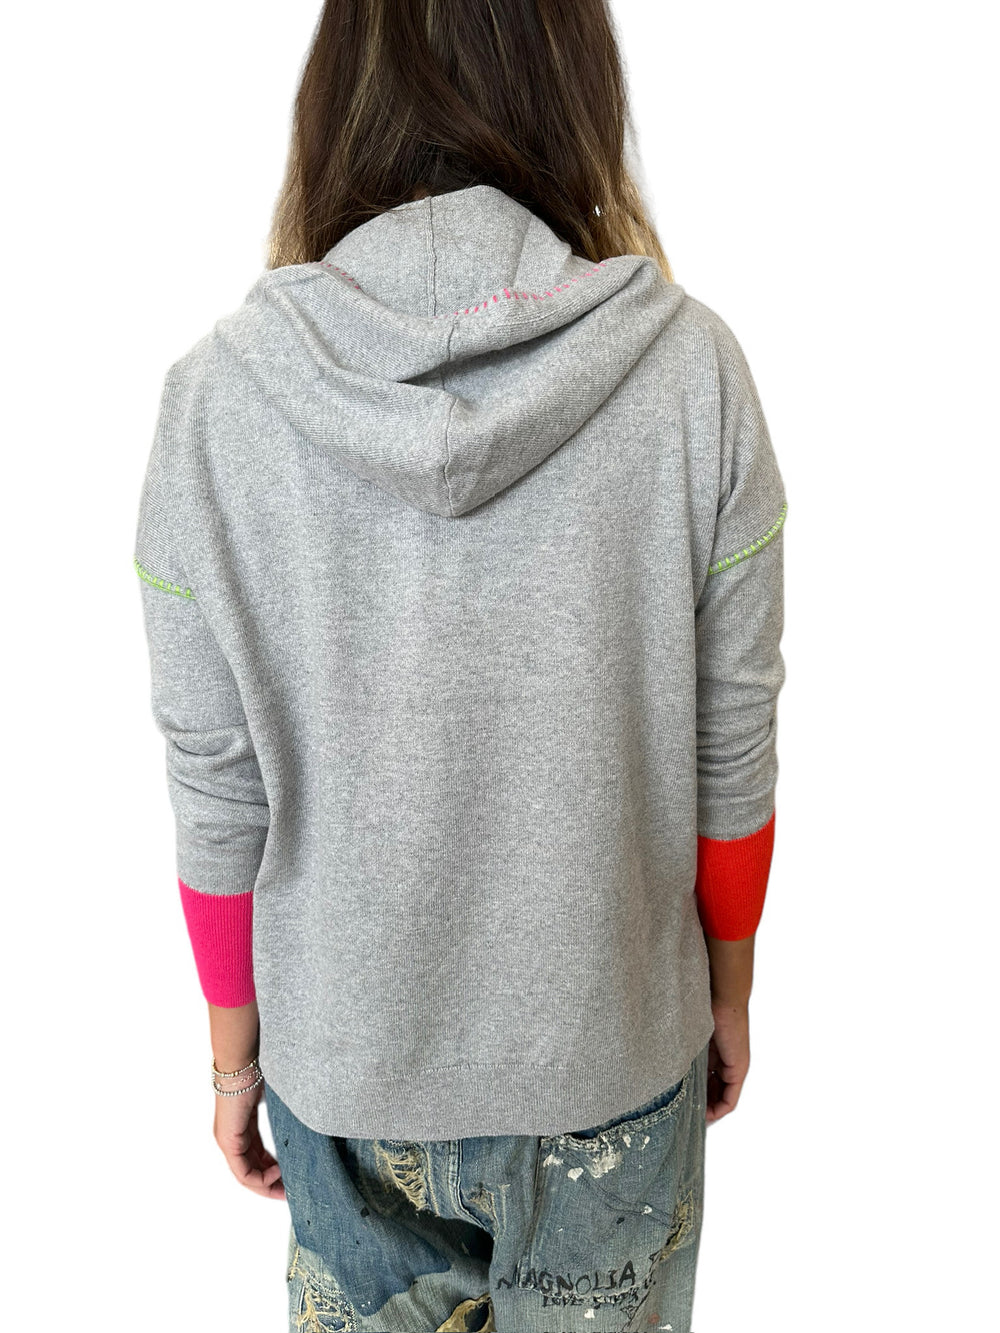 WHIPSTITCH HOODIE - HEATHER - Kingfisher Road - Online Boutique